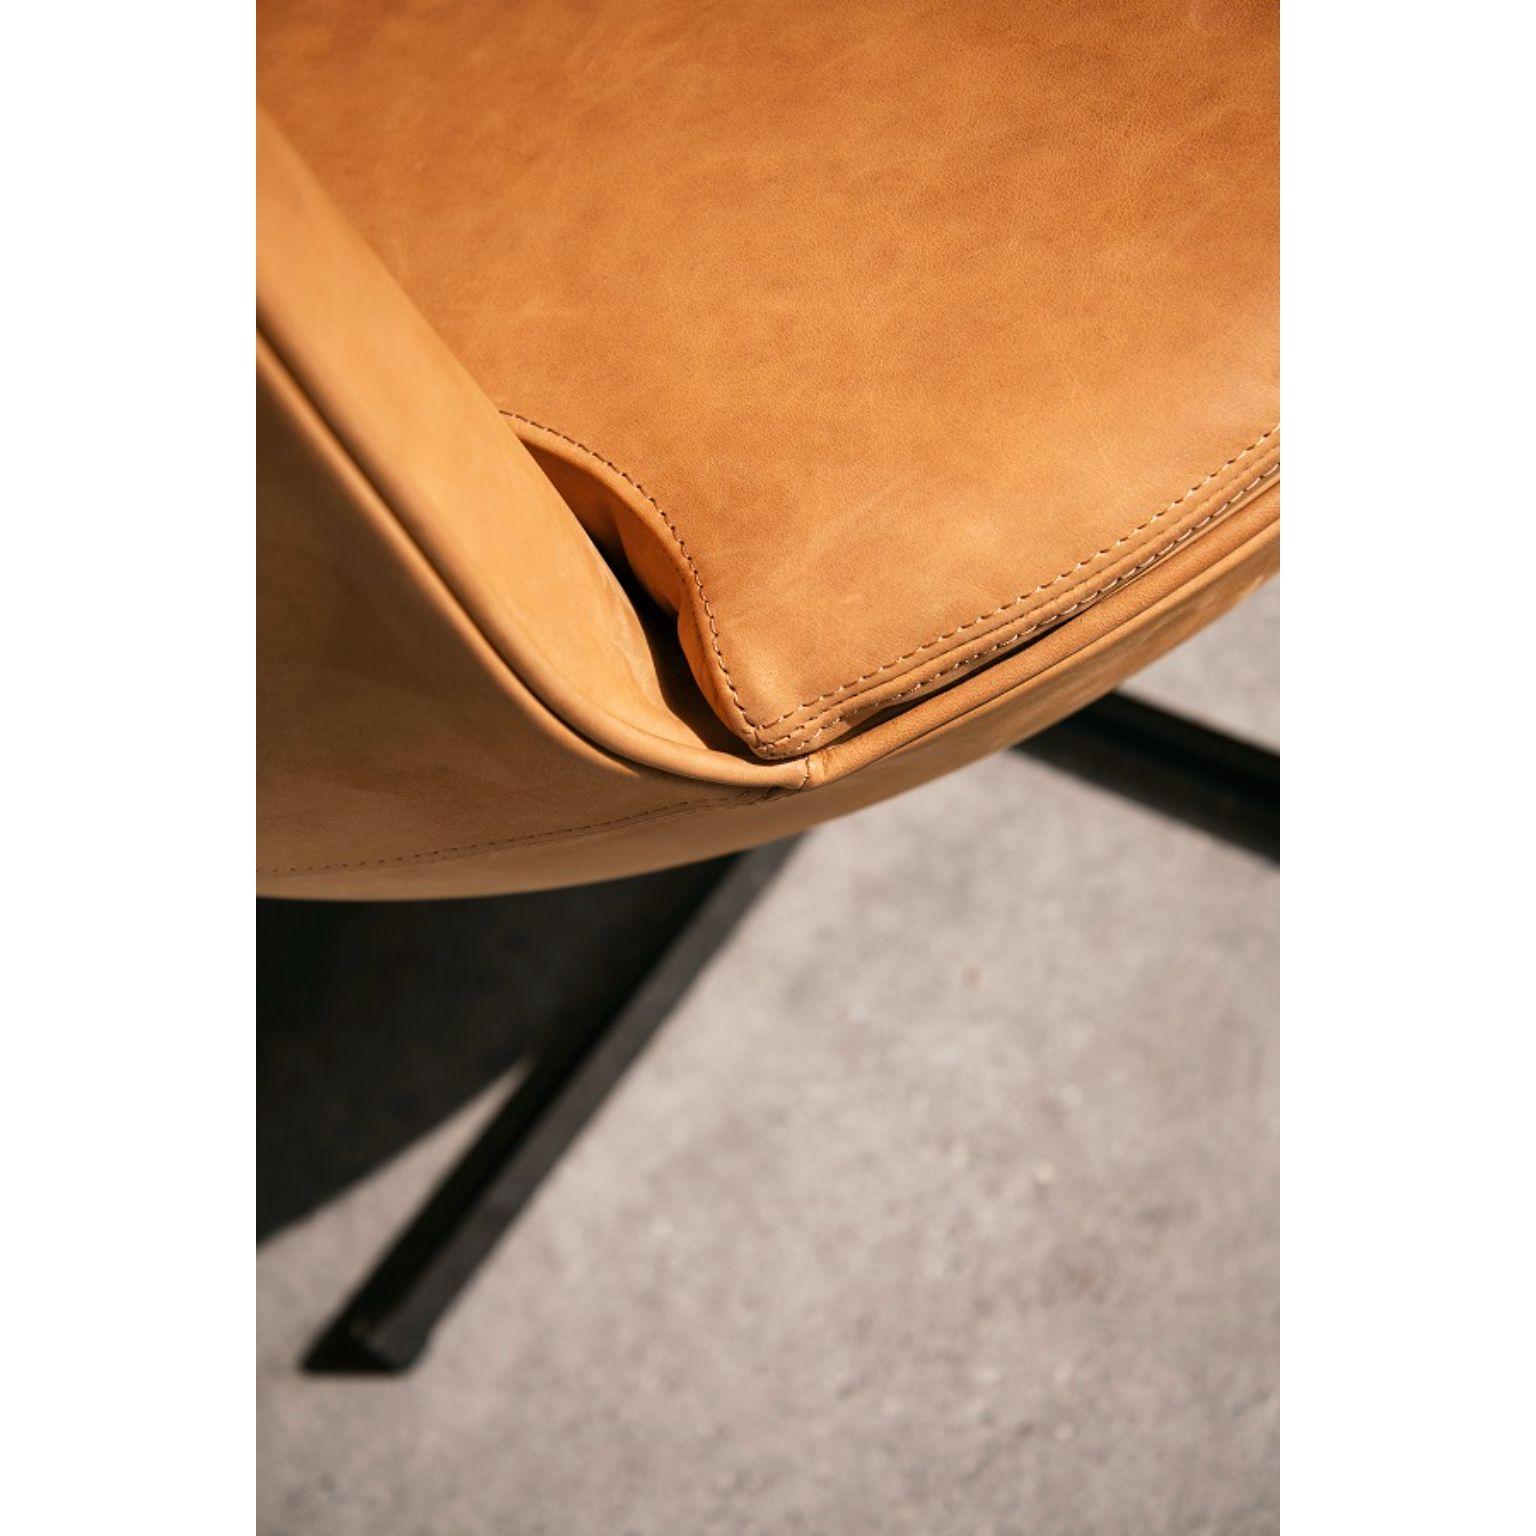 Calice Armchair by Patrick Norguet For Sale 5